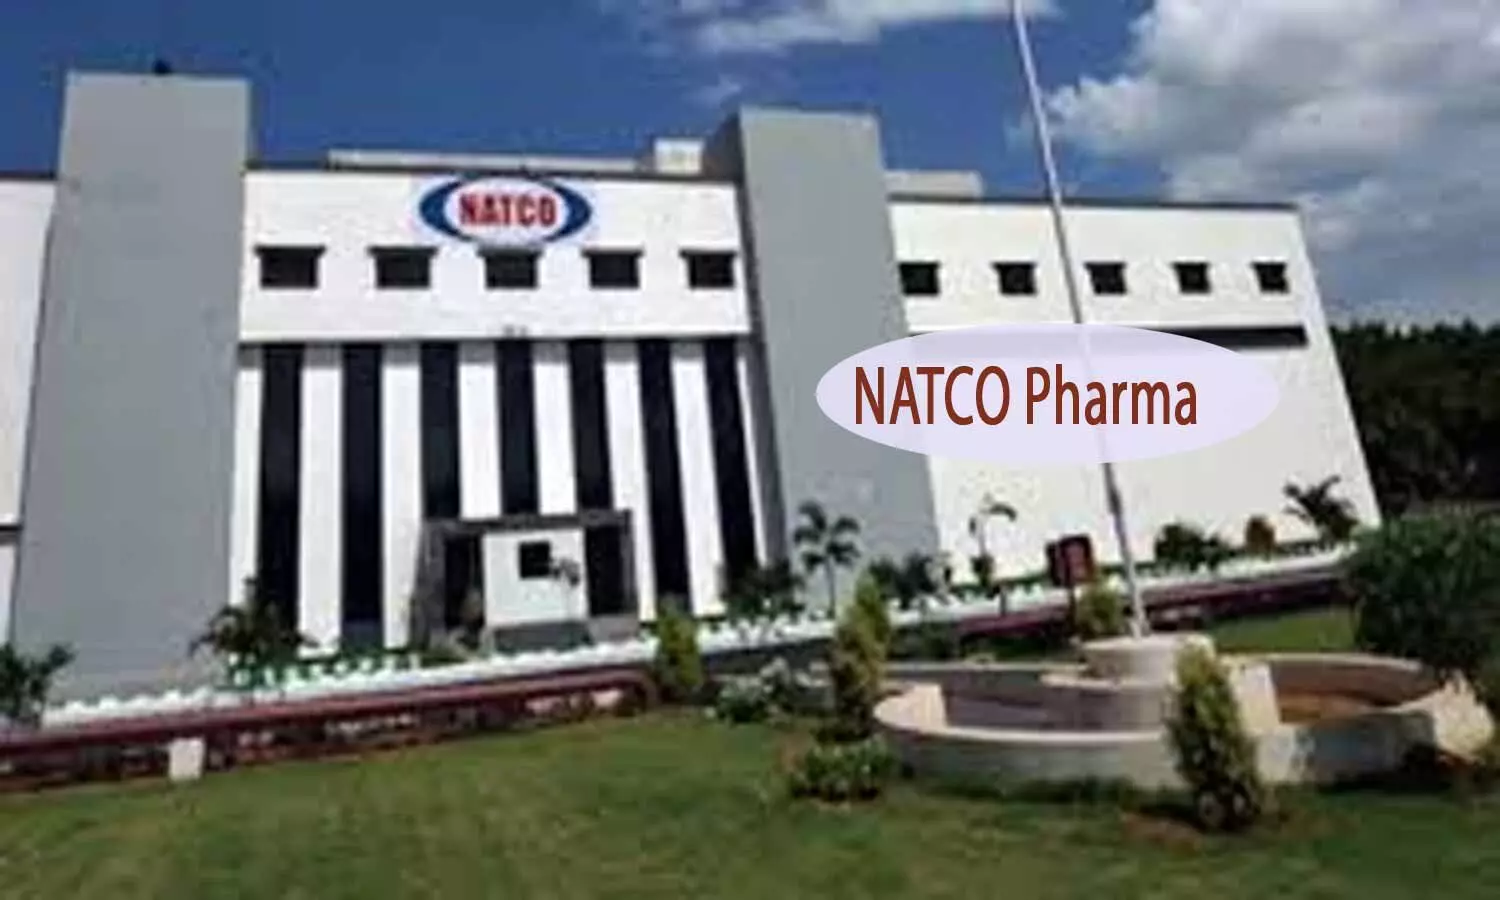 Natco Pharma arm launches first generic alternative to Revlimid in Canada